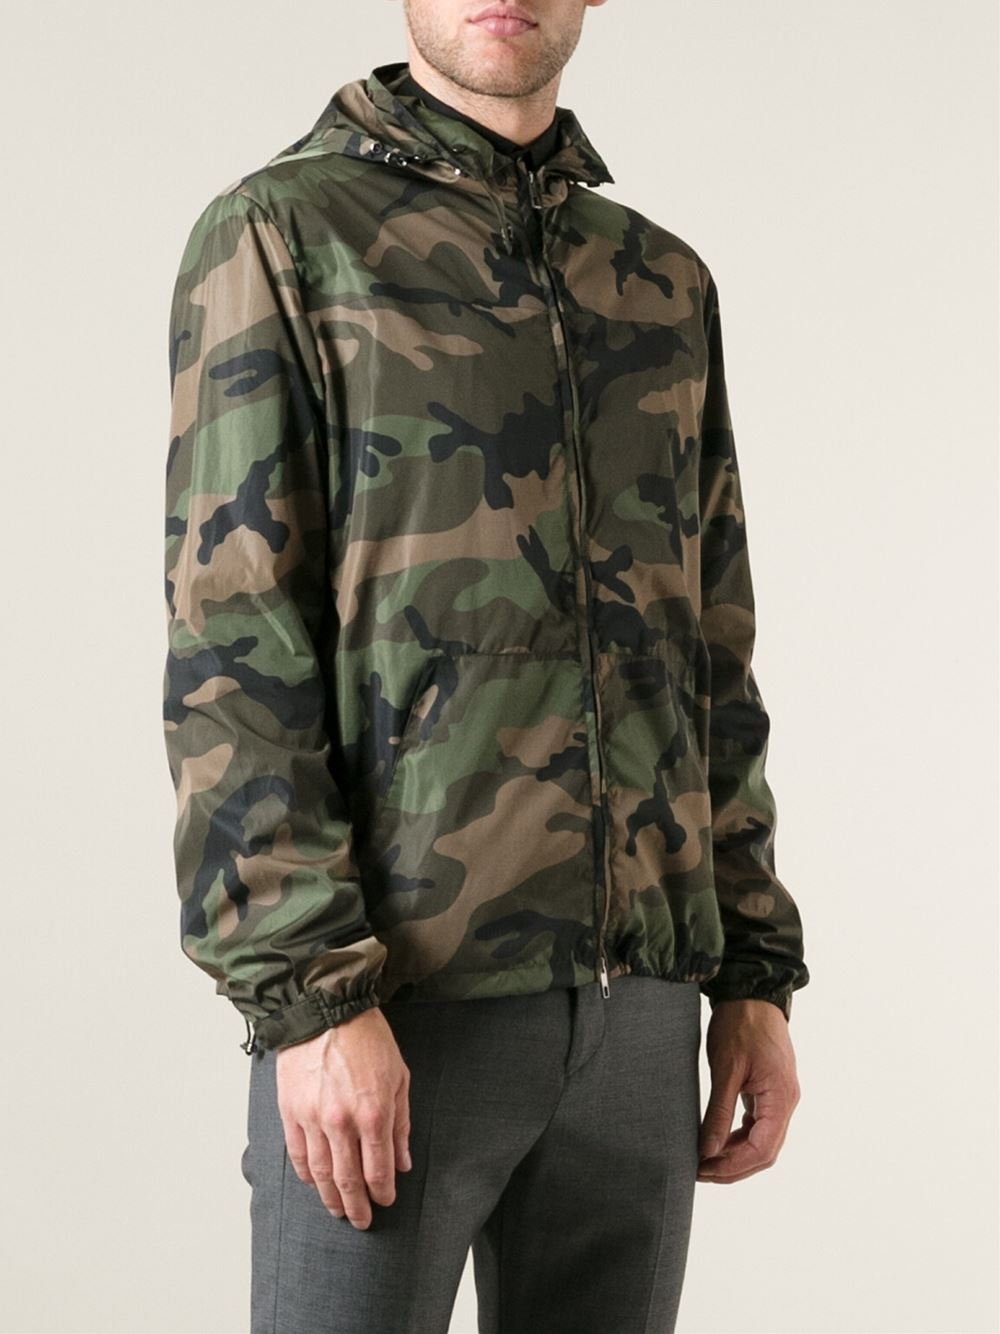 Valentino Camouflage Jacket in Green for Men - Lyst